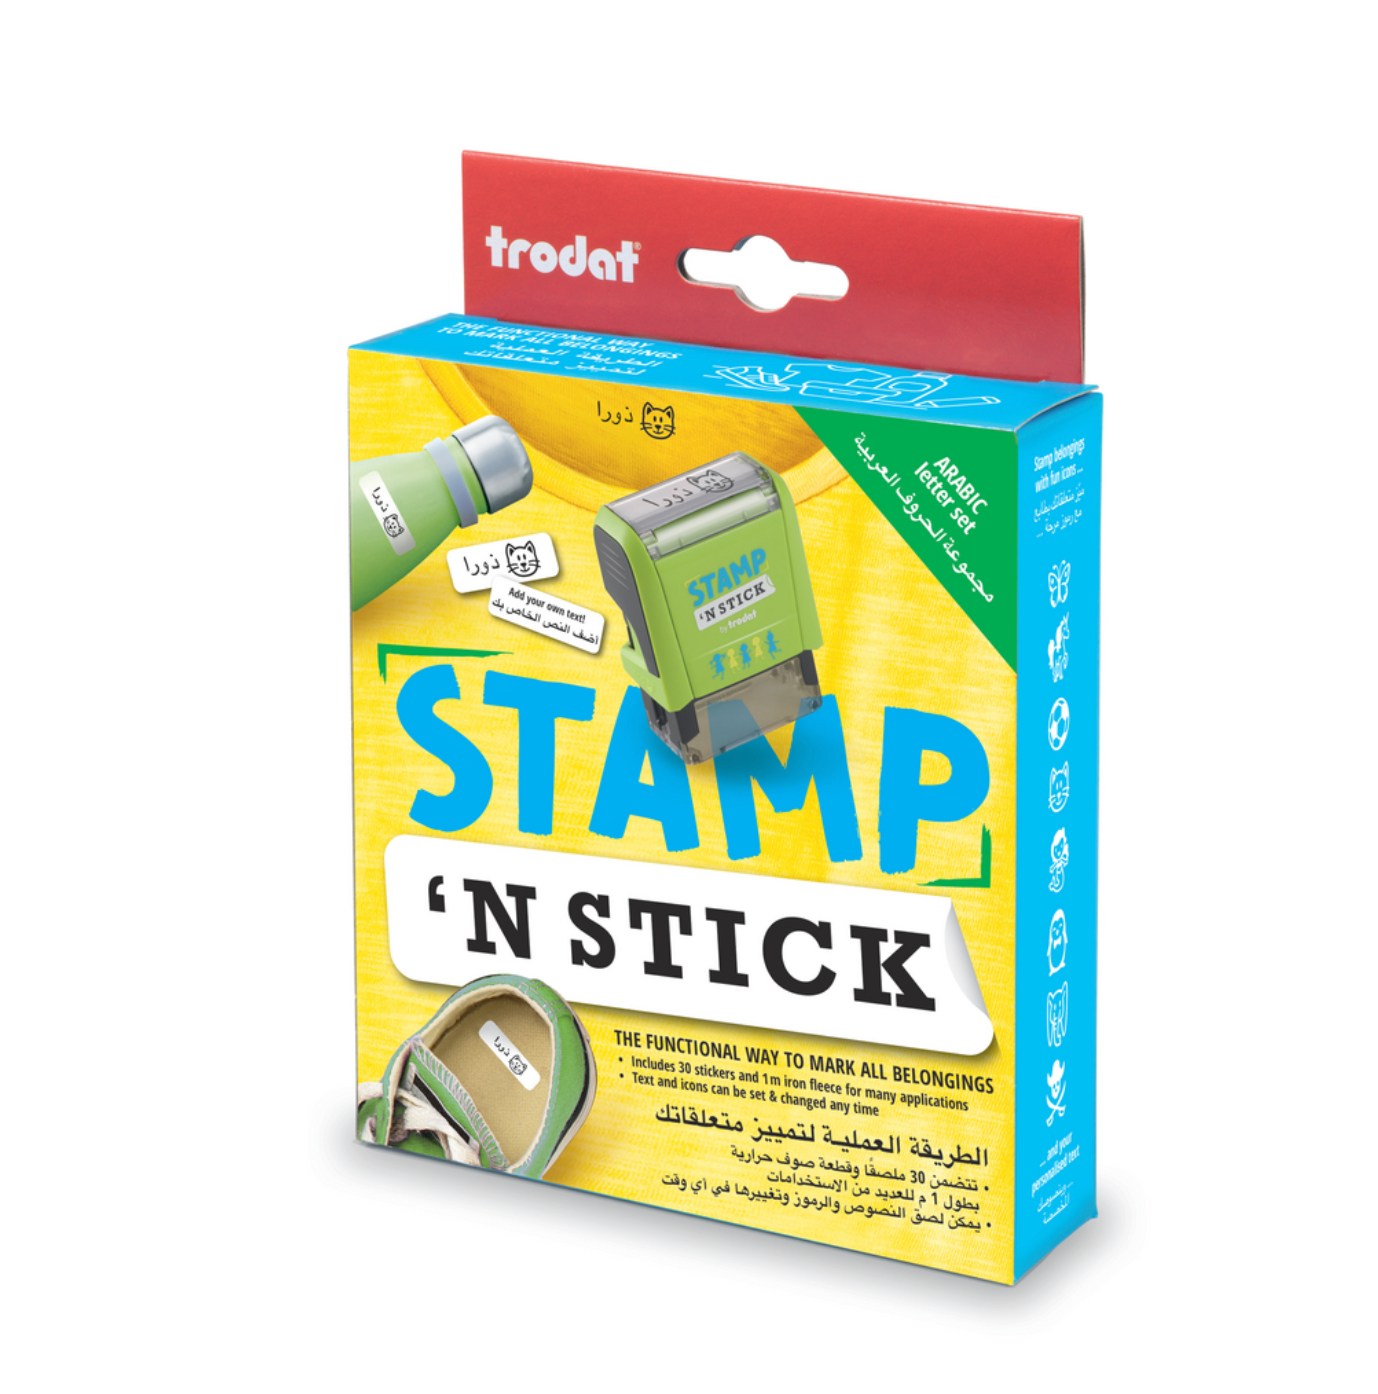 Trodat Stamp 'N Stick Arabic Text 199019 Clothes and Personal Belongings DIY Stamper